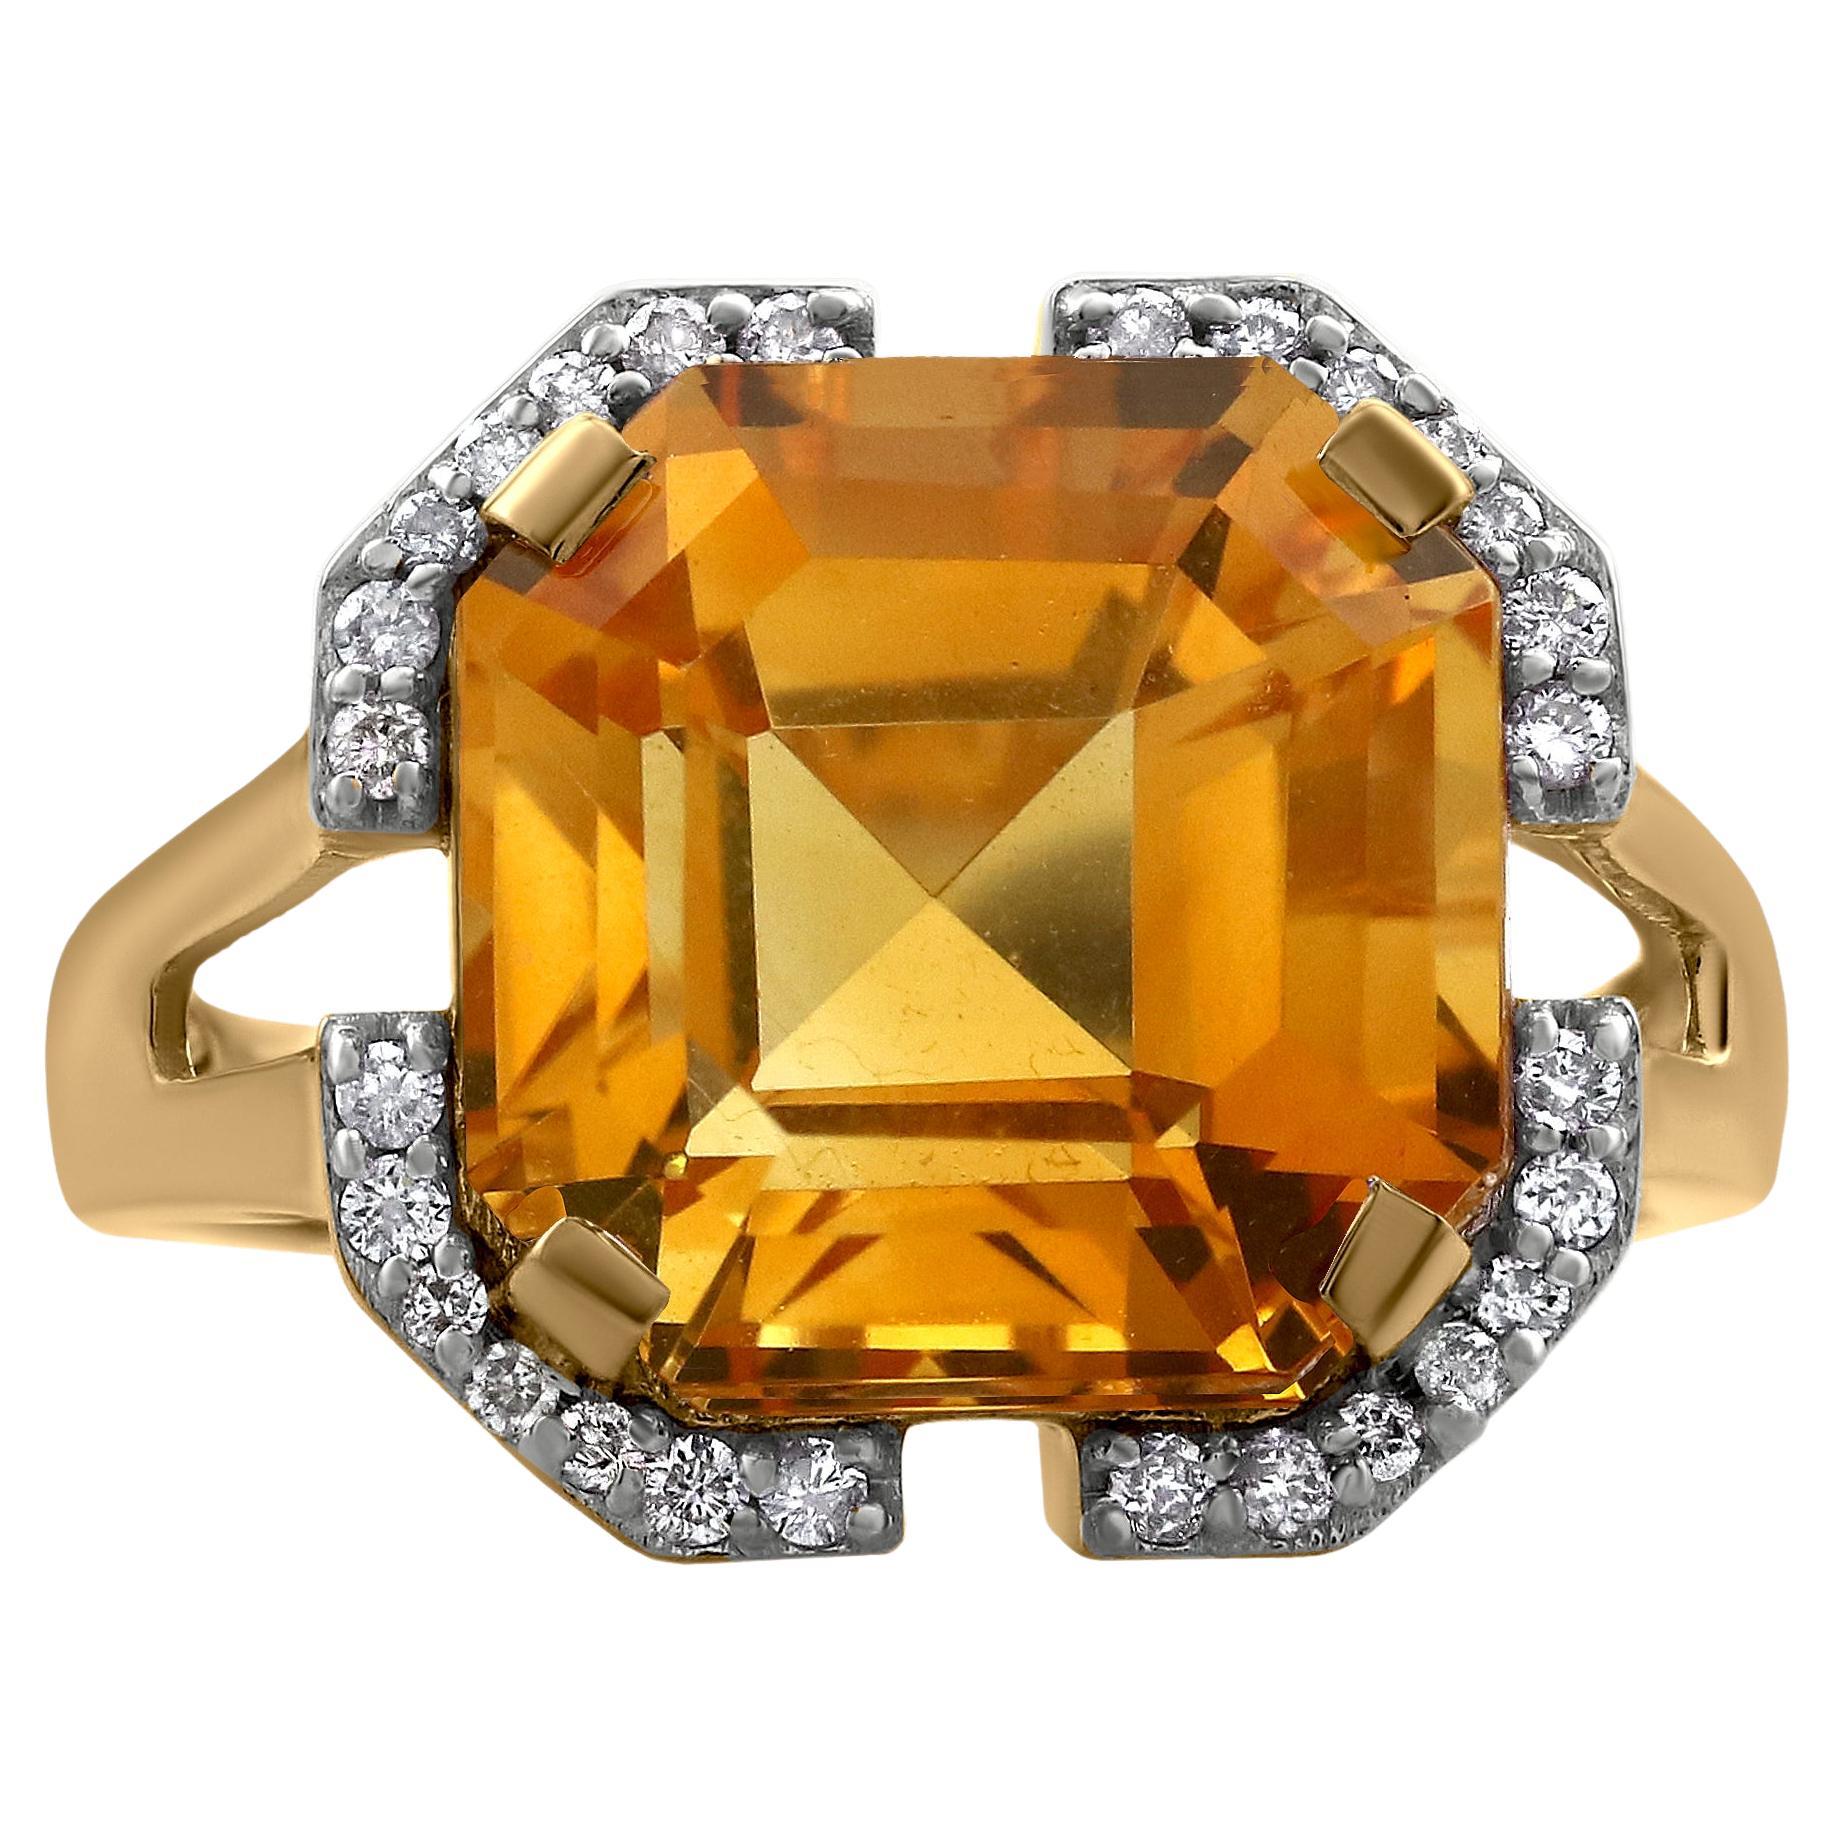 Gemistry 7.4 Carat Asscher Cut Citrine Solitaire Ring with Diamond in 14K Gold